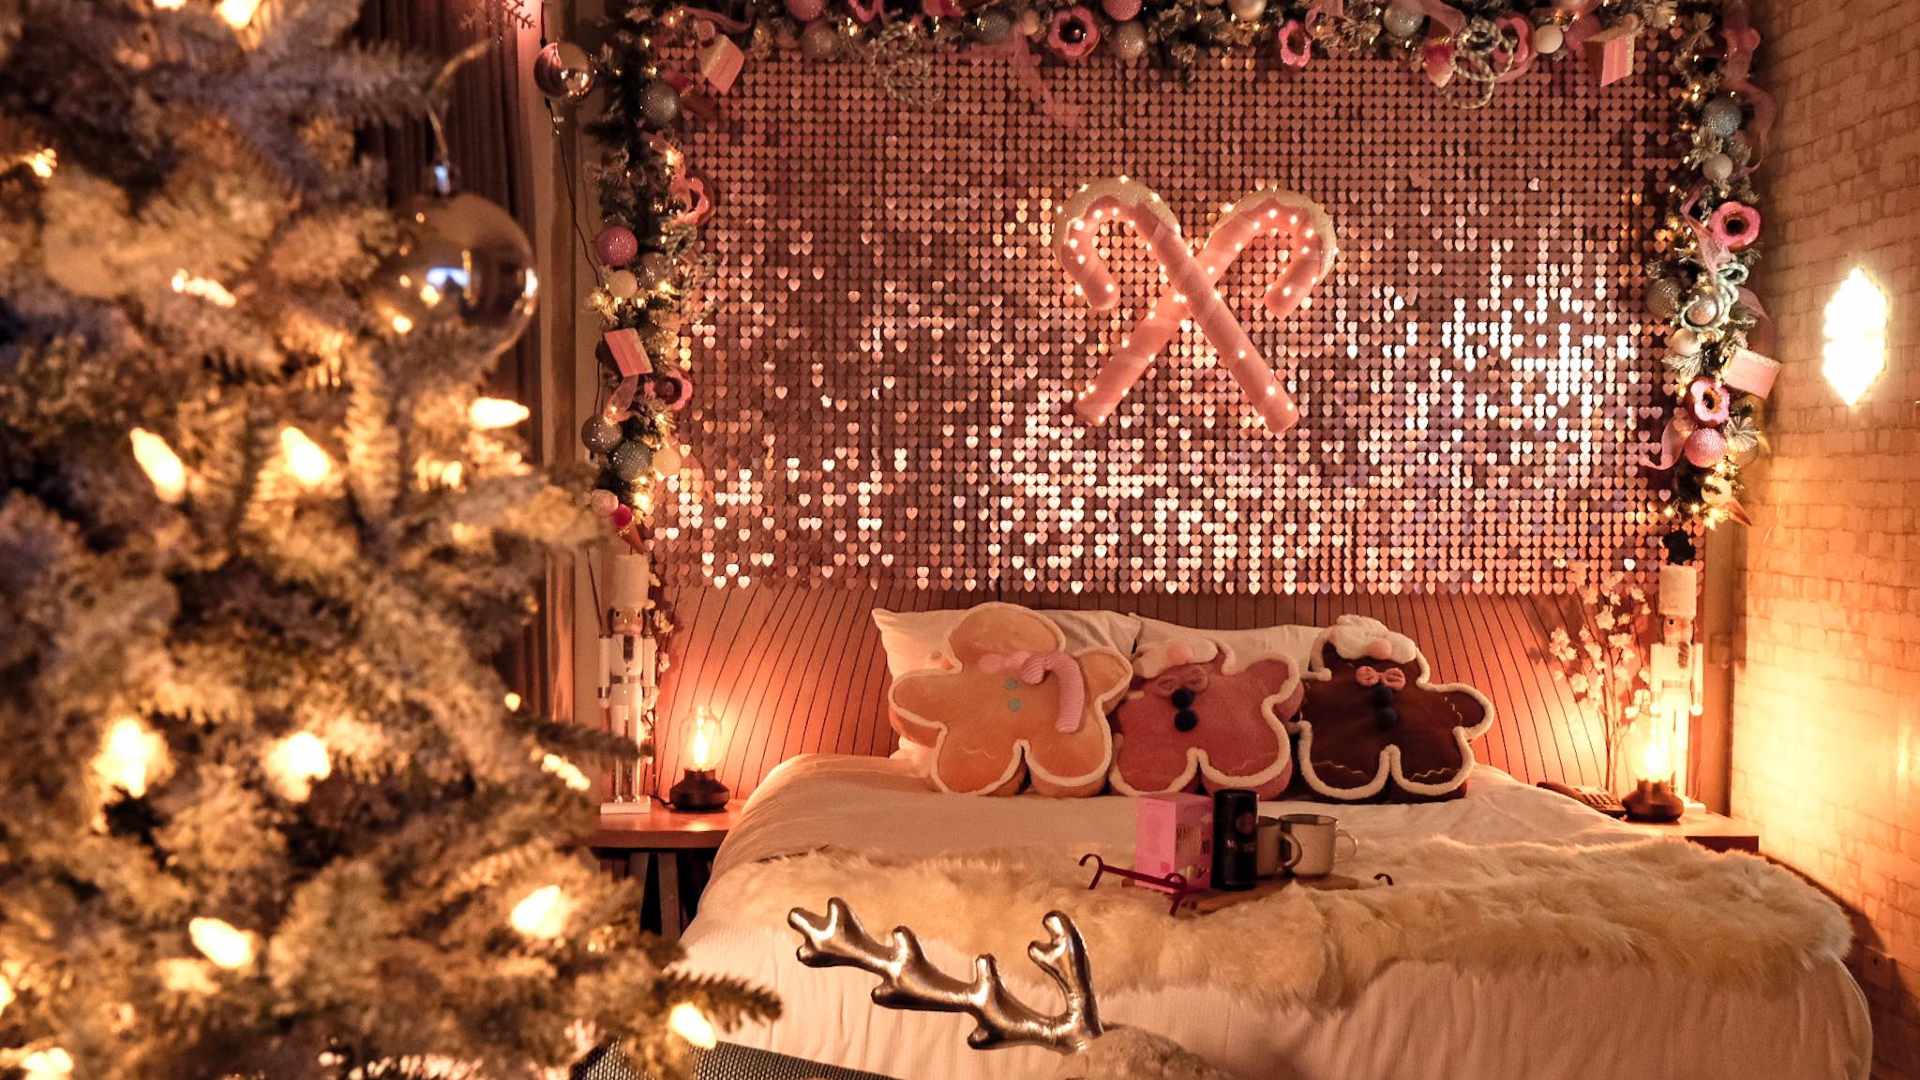 DoubleTree by Hilton Has Unveiled Two Christmas-Themed Rooms If You Fancy a Festive Staycation